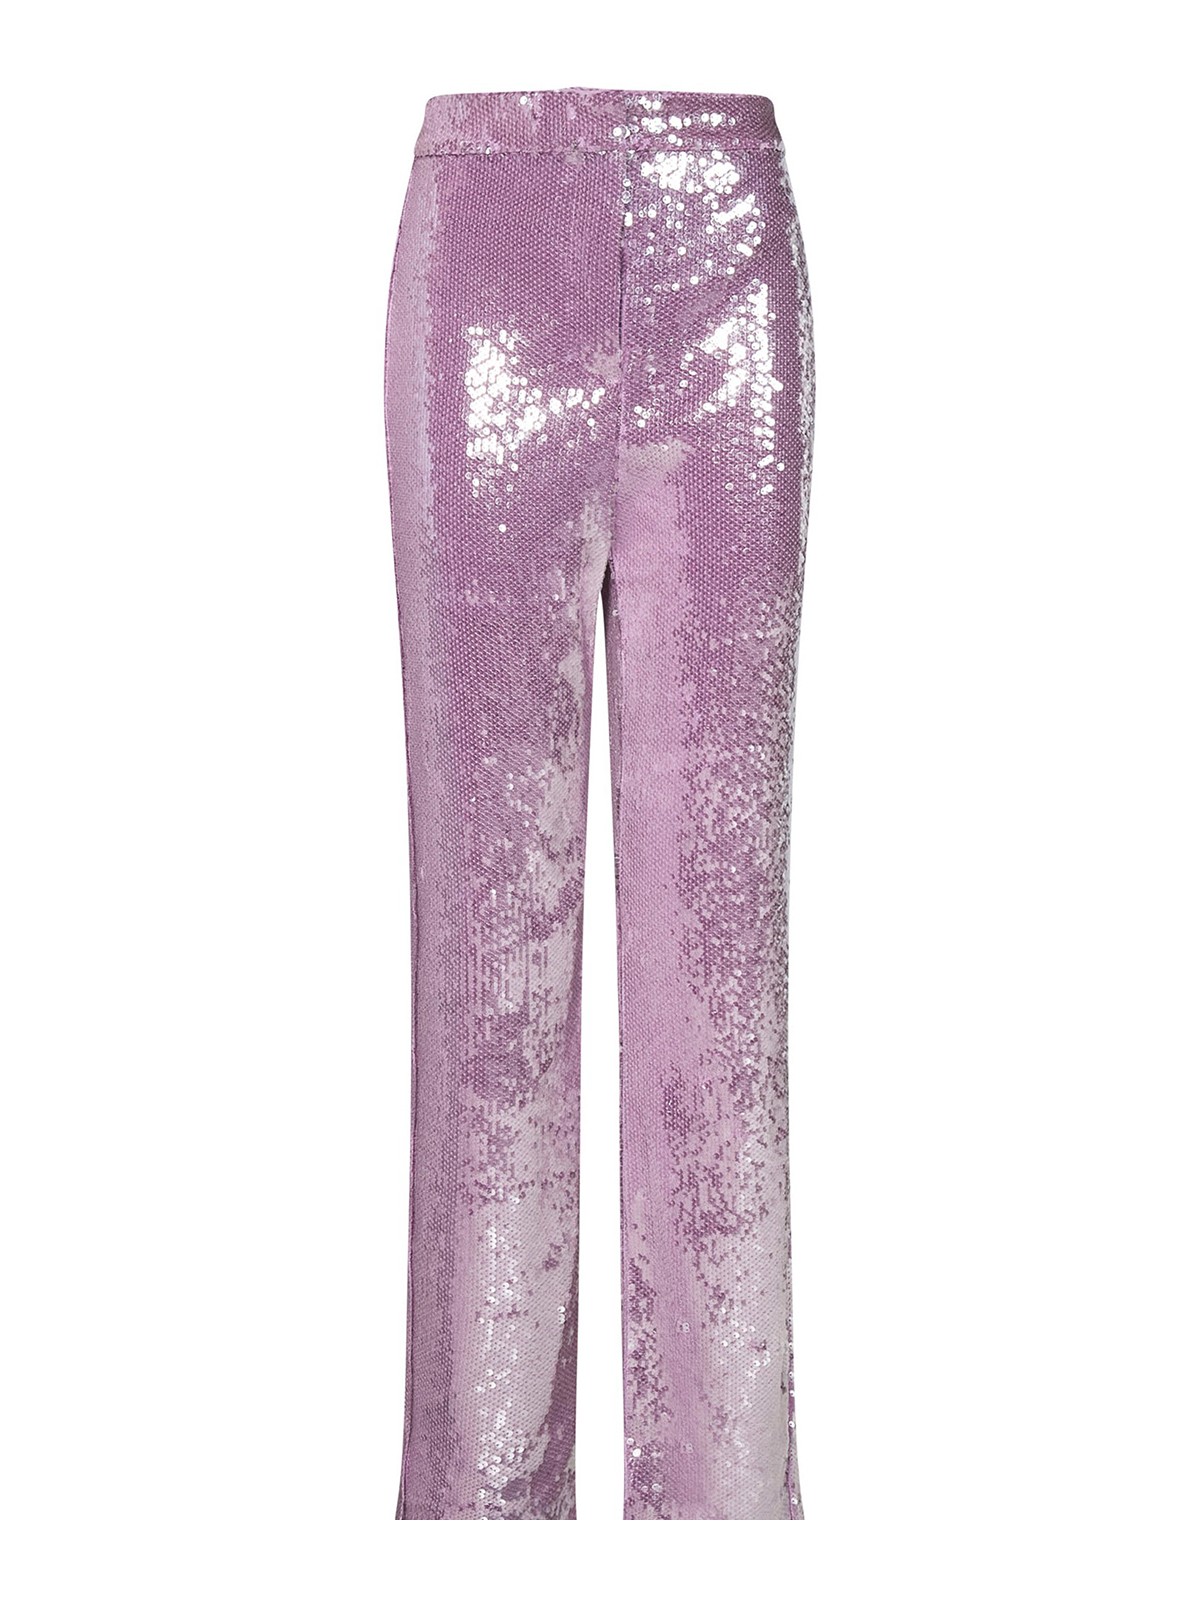 Rotate Birger Christensen Sequined Pants In Pink